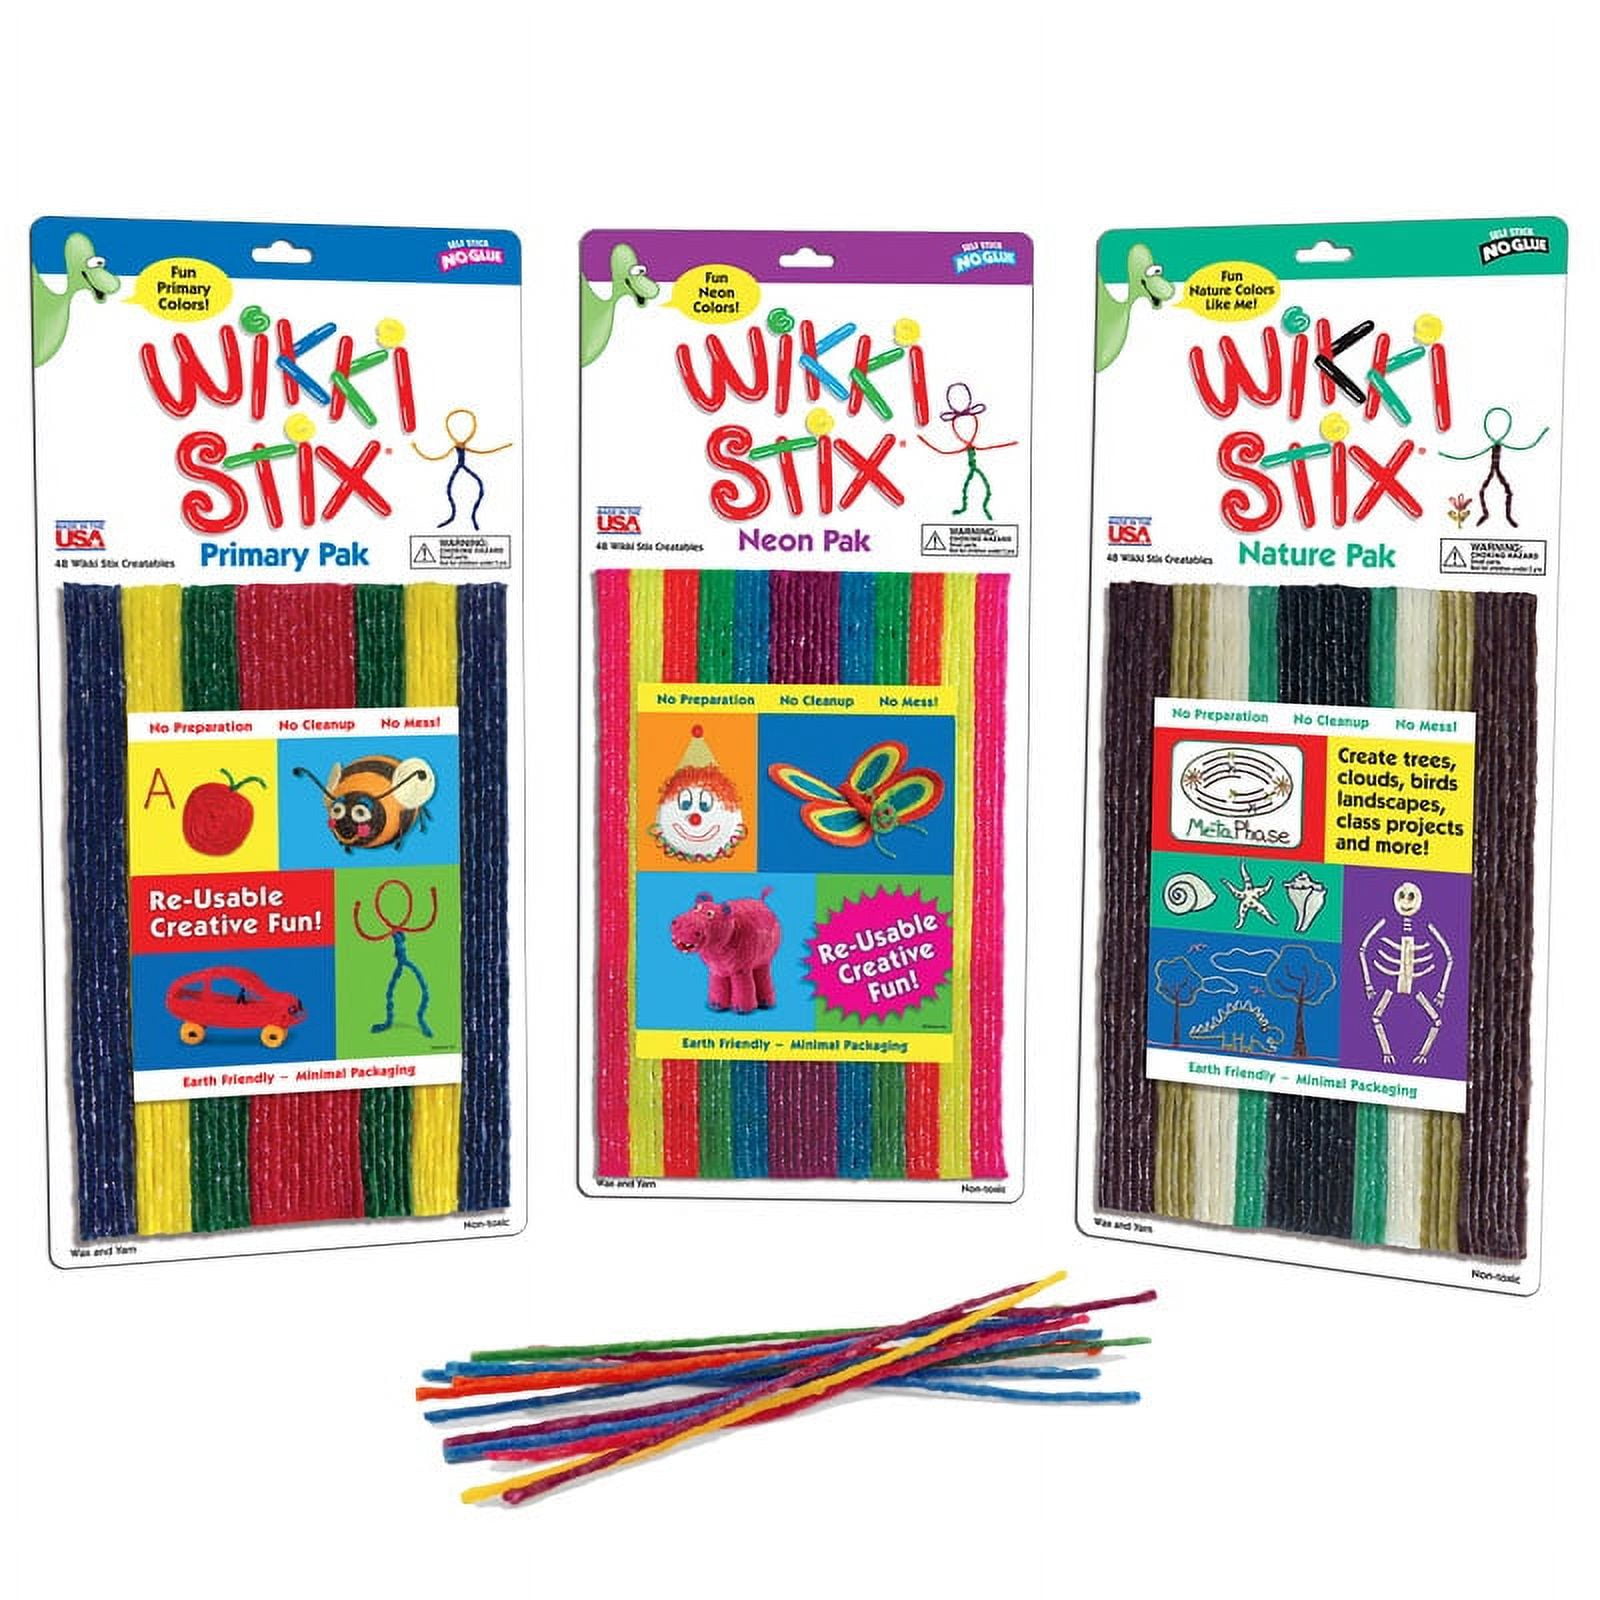 9 3D Wikki Stix Creations with How to Instructions ideas